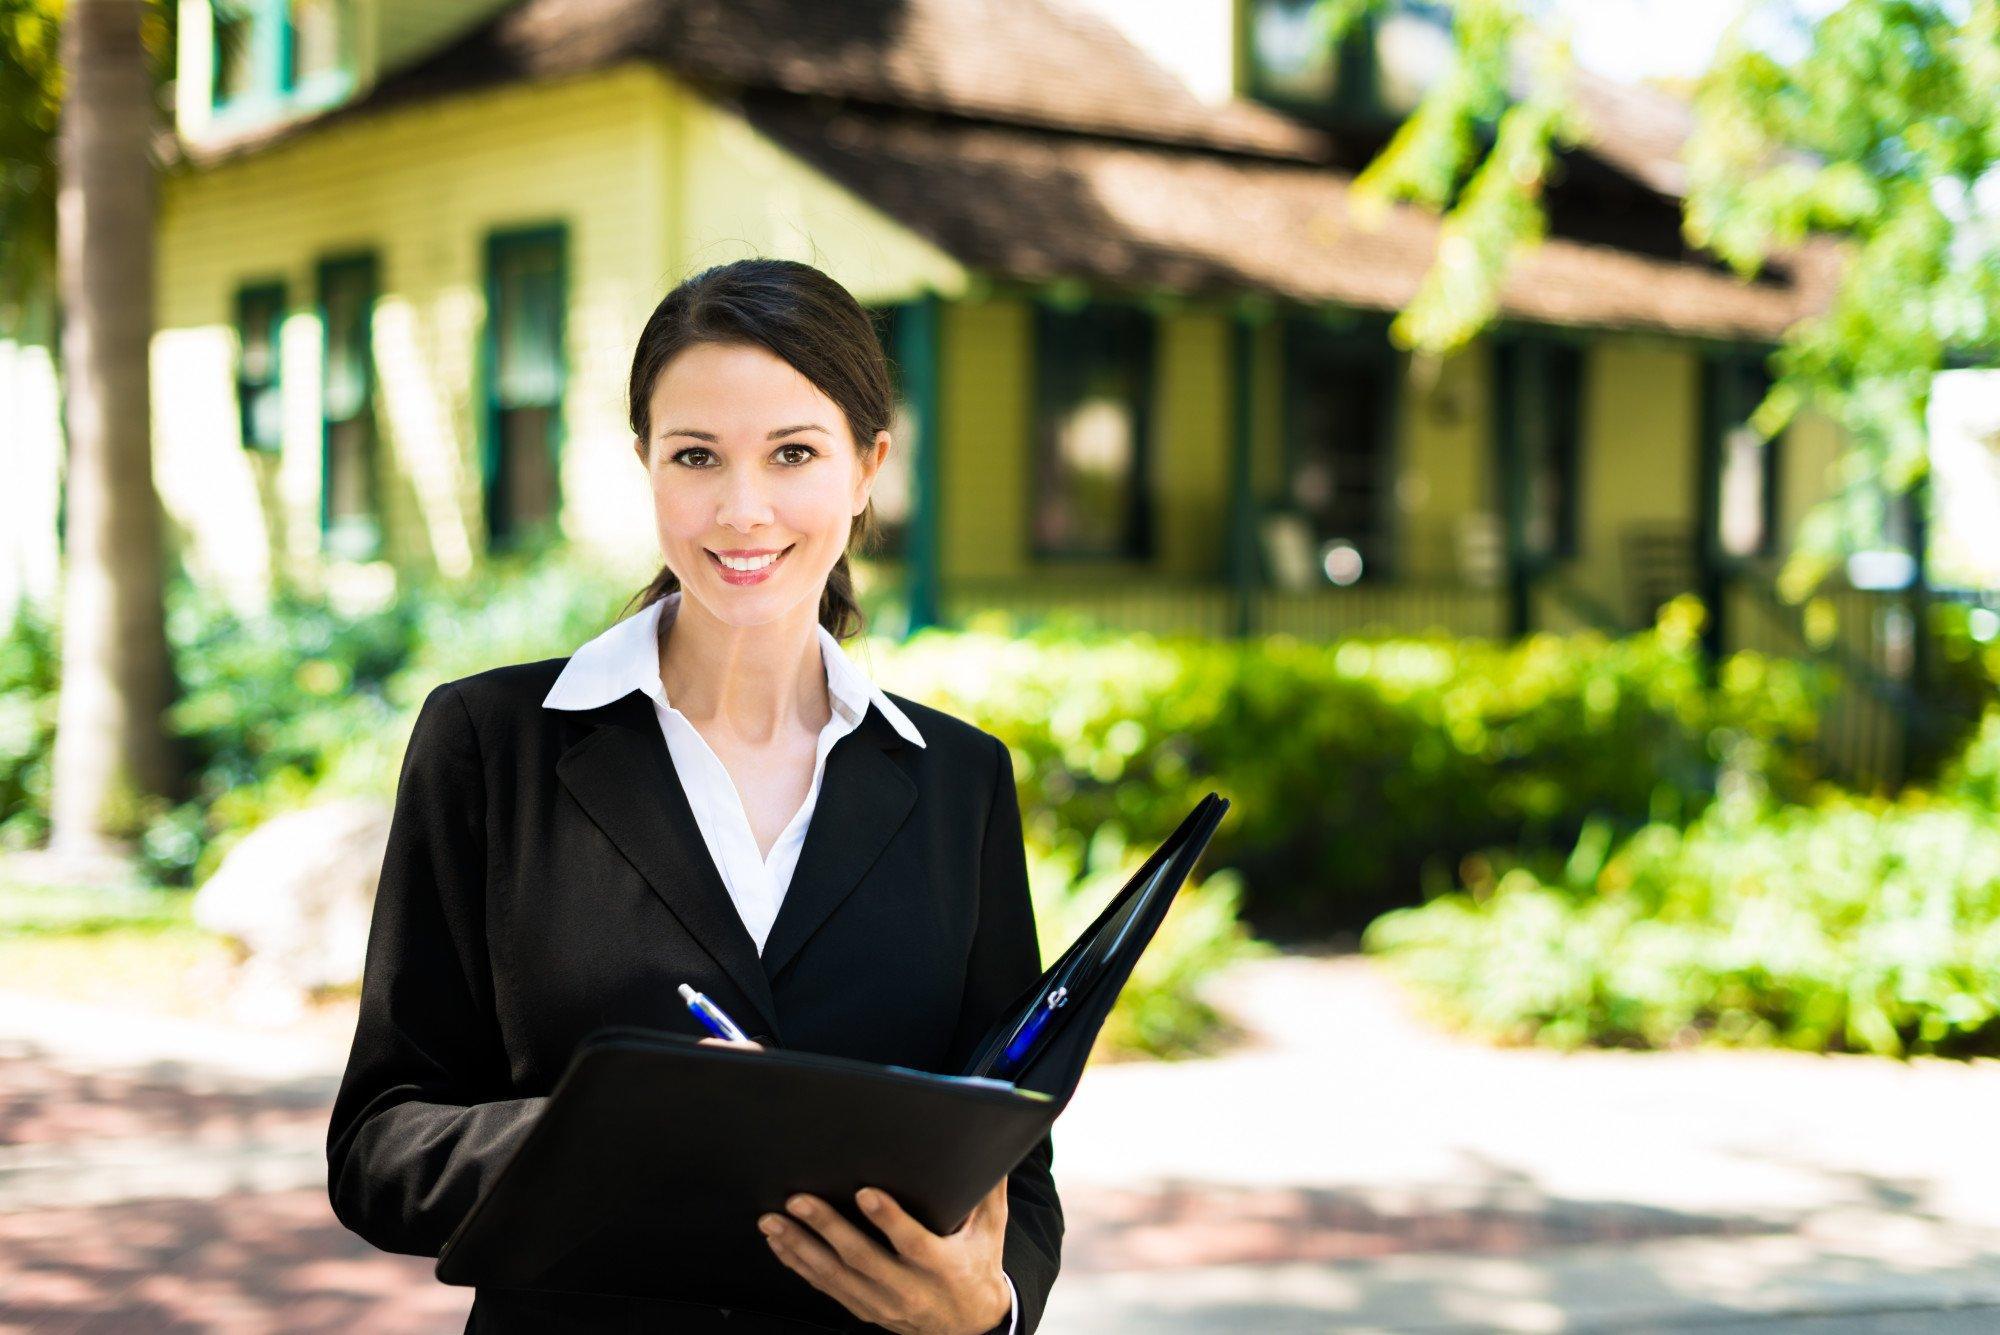 how to get a job as a real estate agent